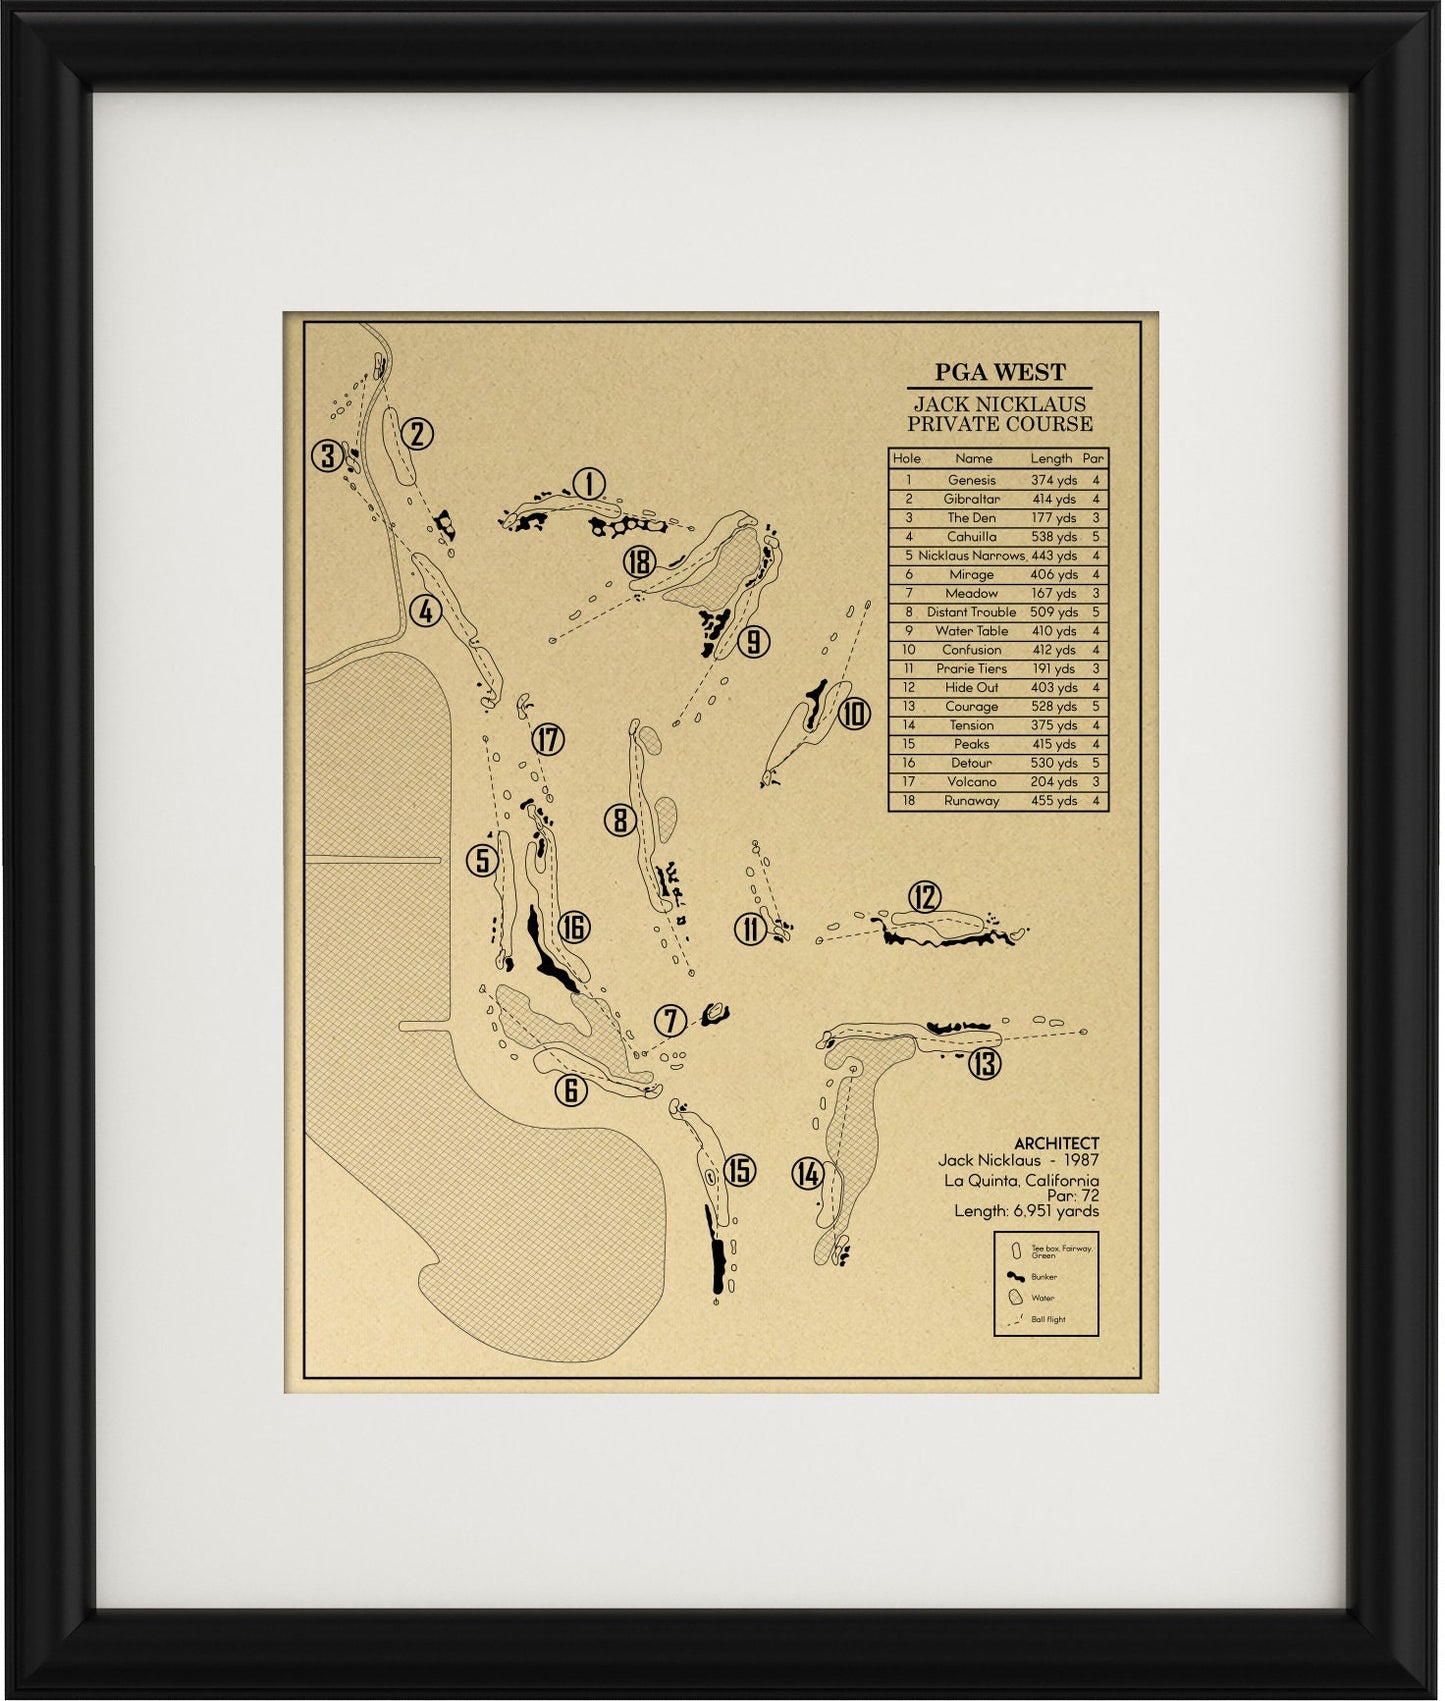 PGA West Jack Nicklaus Private Course Outline (Print)